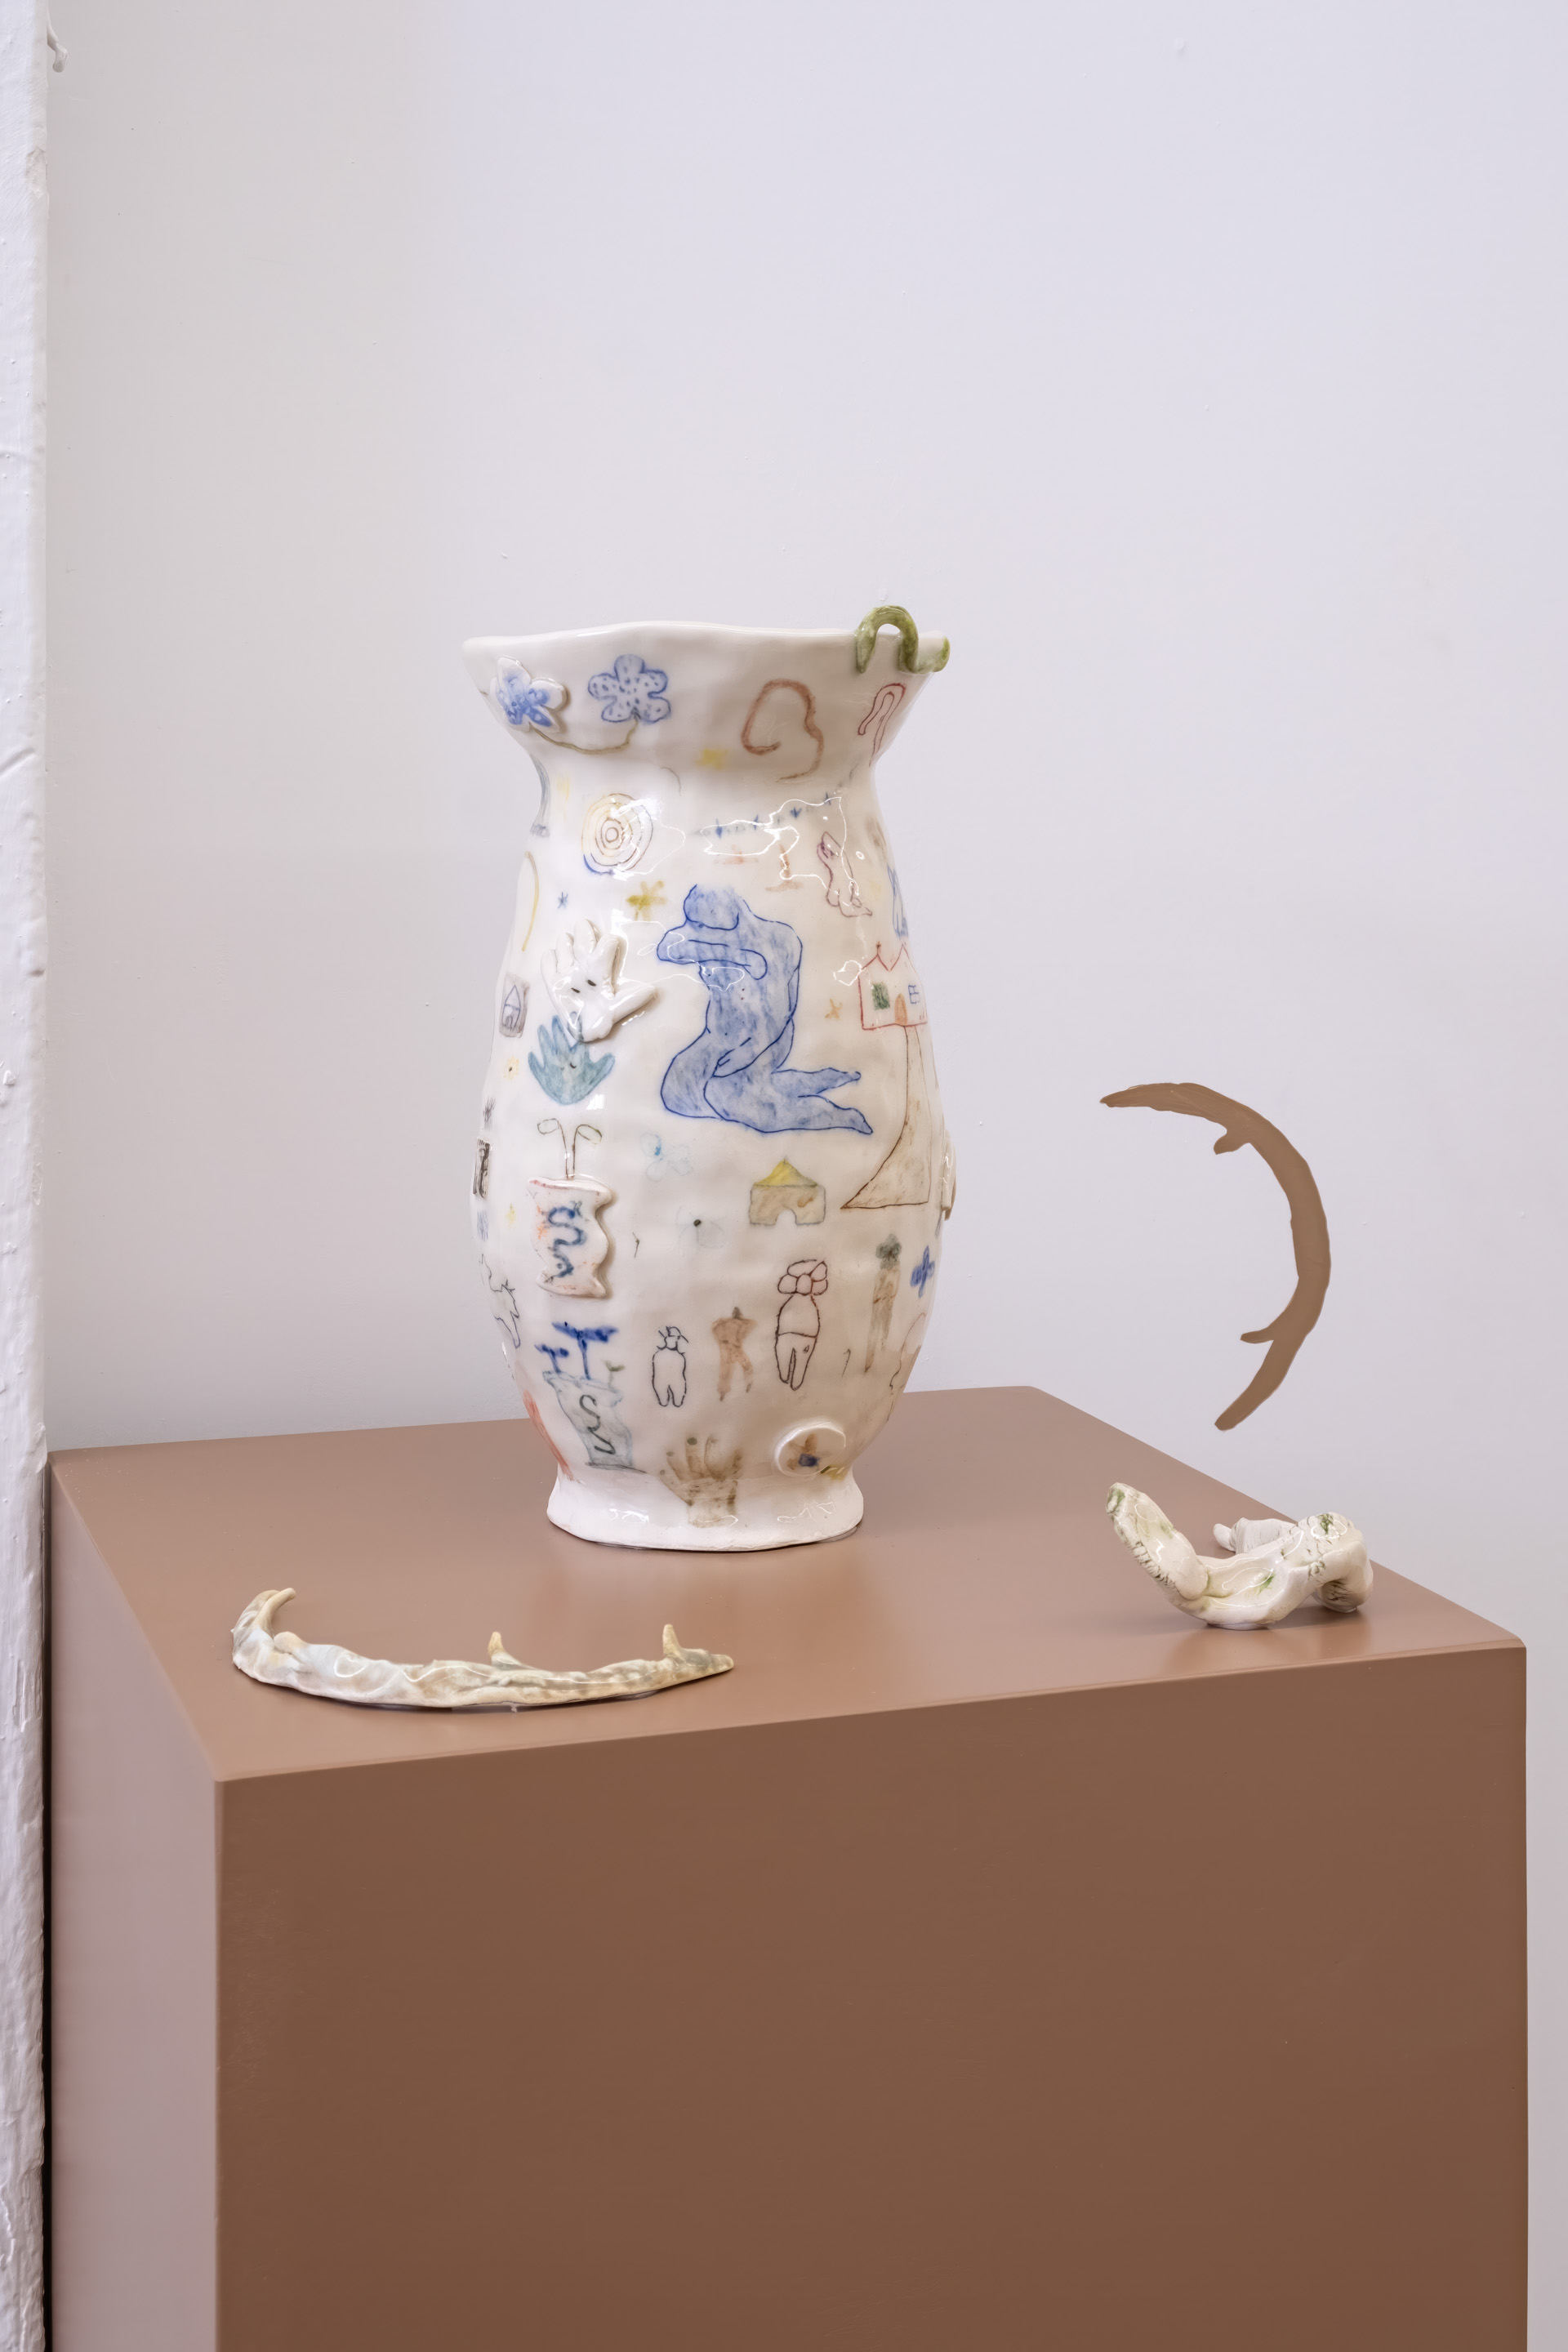 Kendra Yee, Grass Jelly, 2020-21, 9½″×5½″×5½″ White Glazed Stoneware with Etched Detailing and Sculpted Reliefs on view at NAMARA Projects